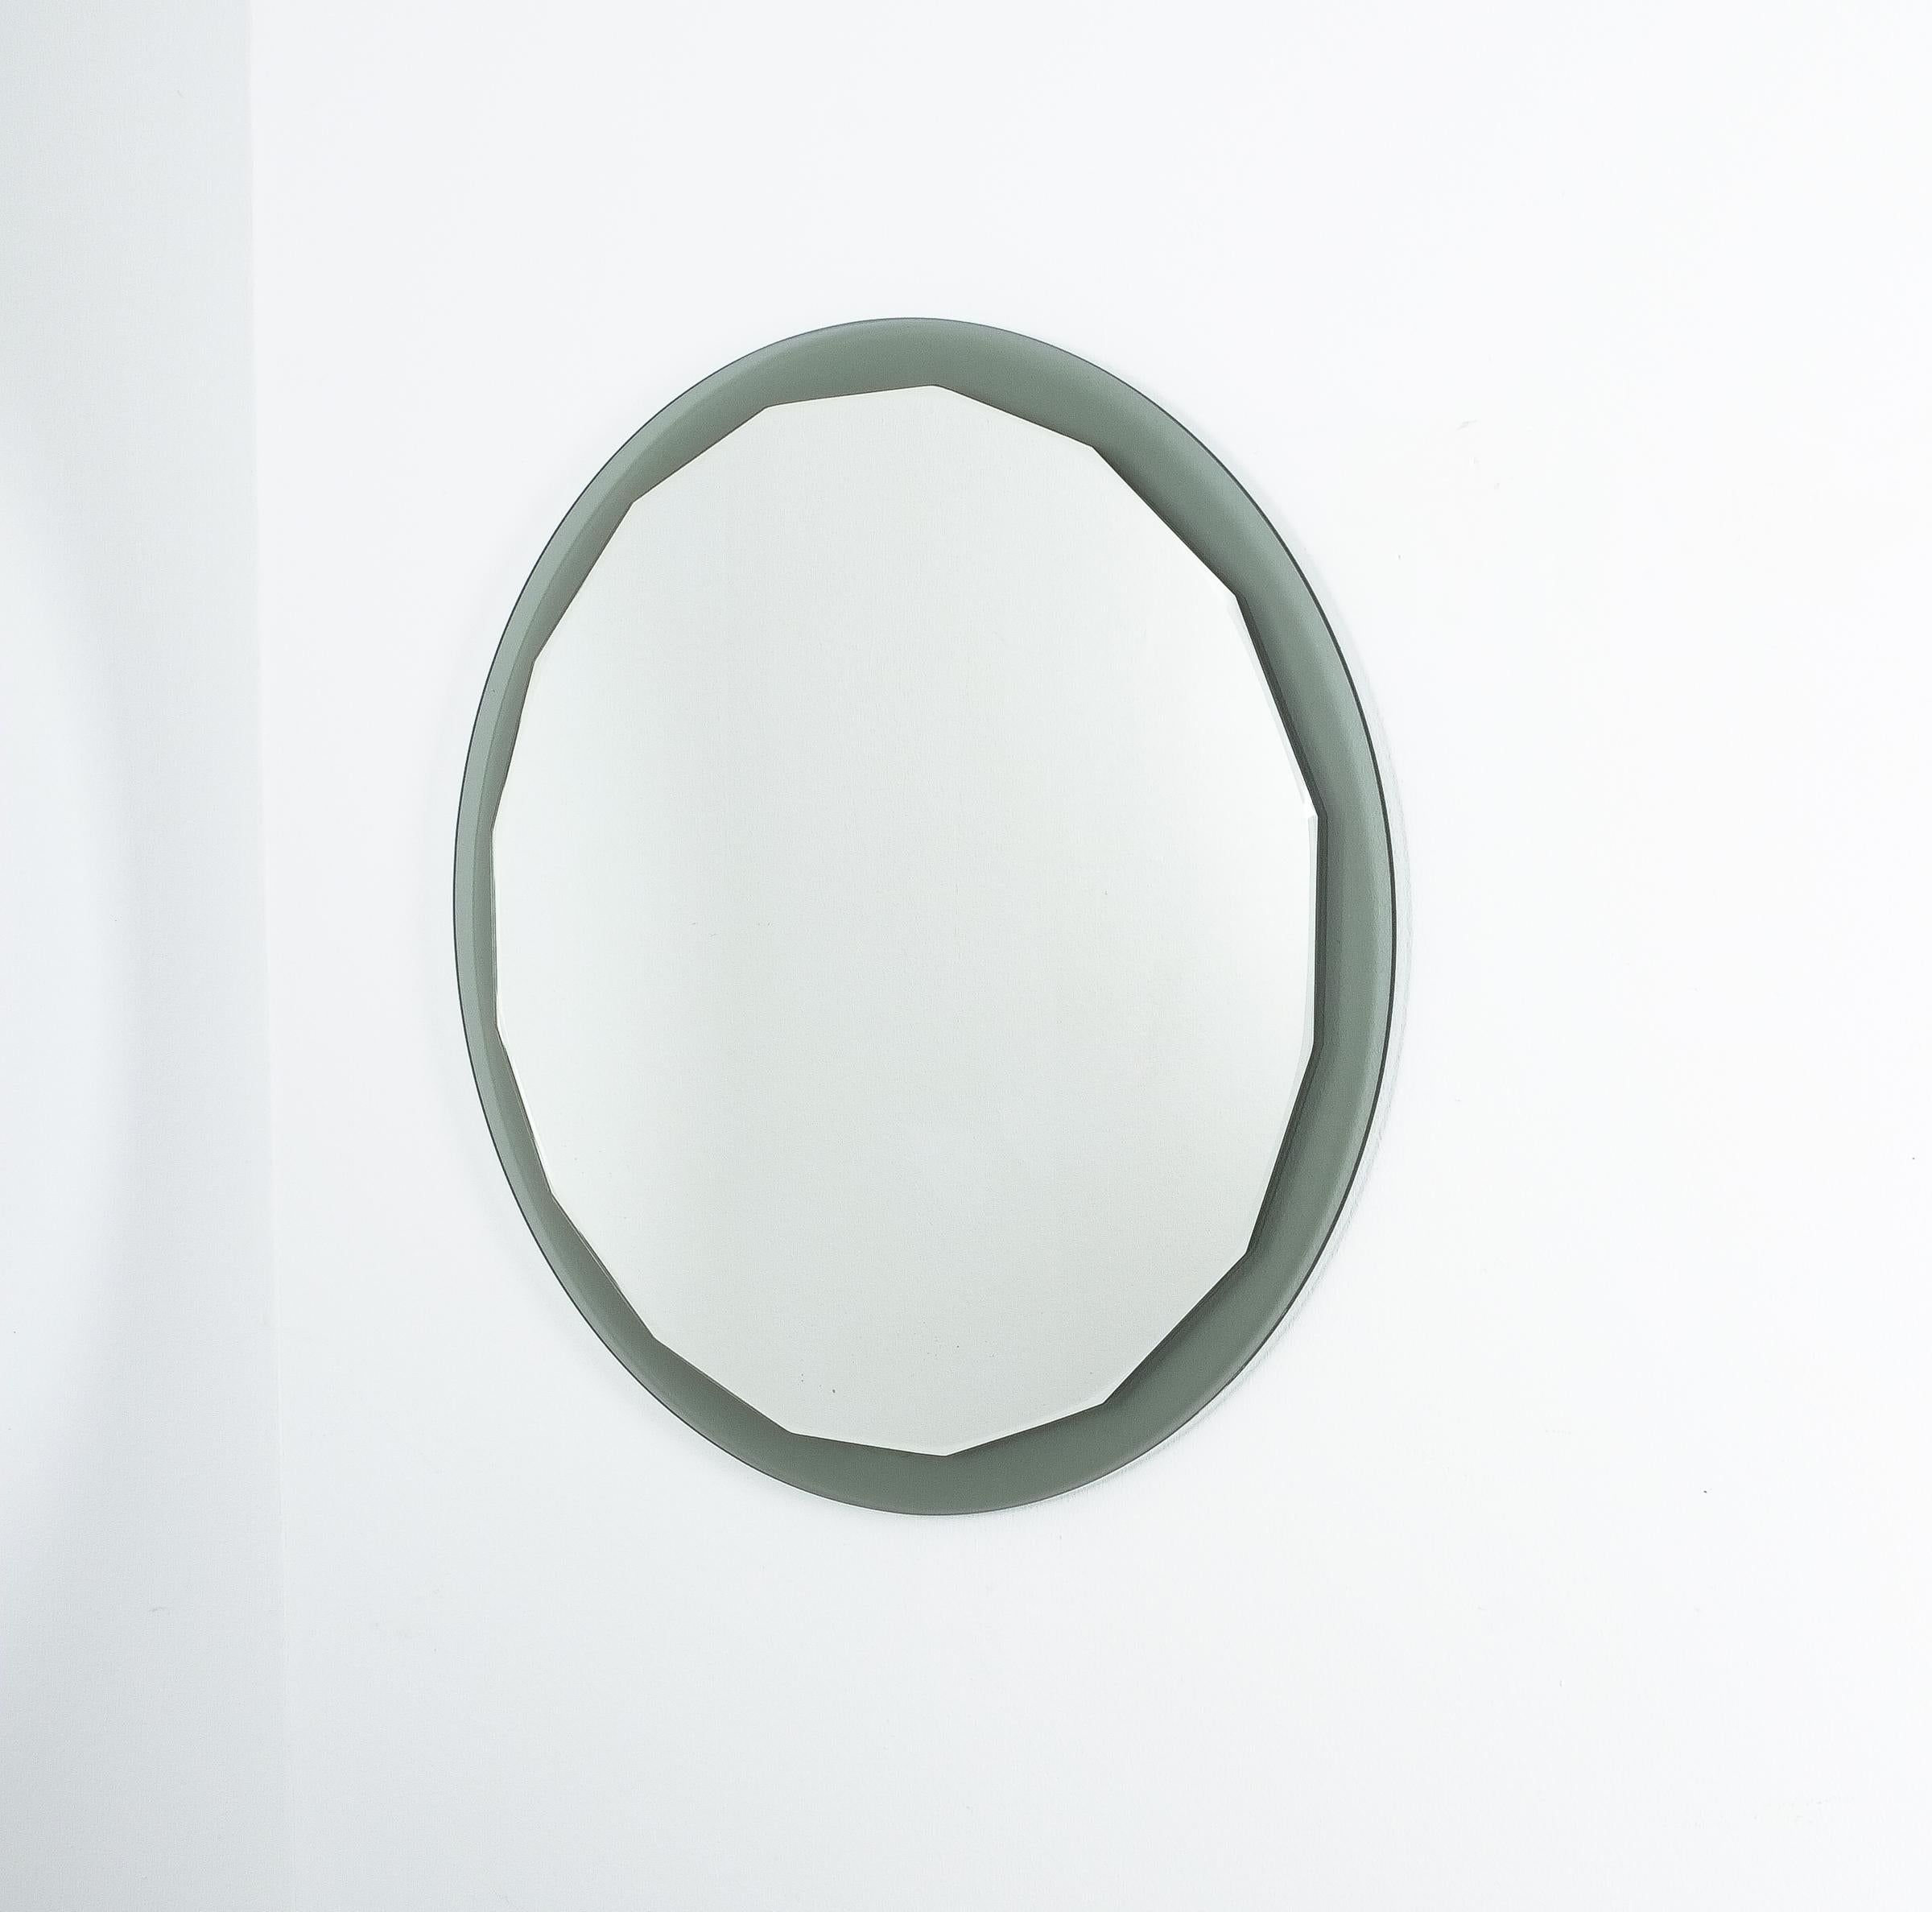 Italian scalloped mirror in the style of Fontana Arte or Cristal Arte

Greenish smoked round glass frame mirror with 26.8